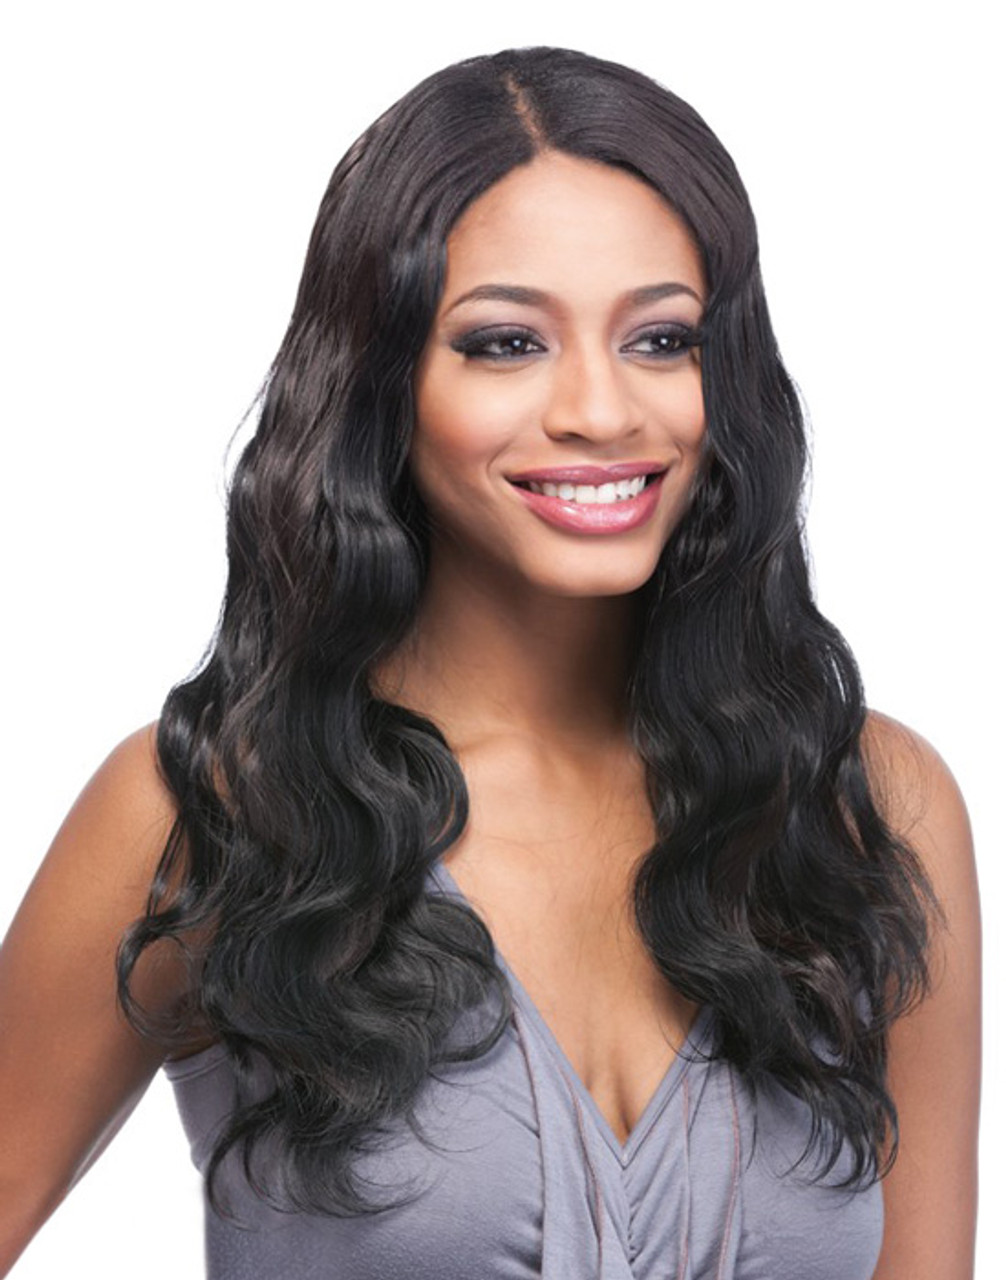 Its A Clip Body Wave Hair Extensions